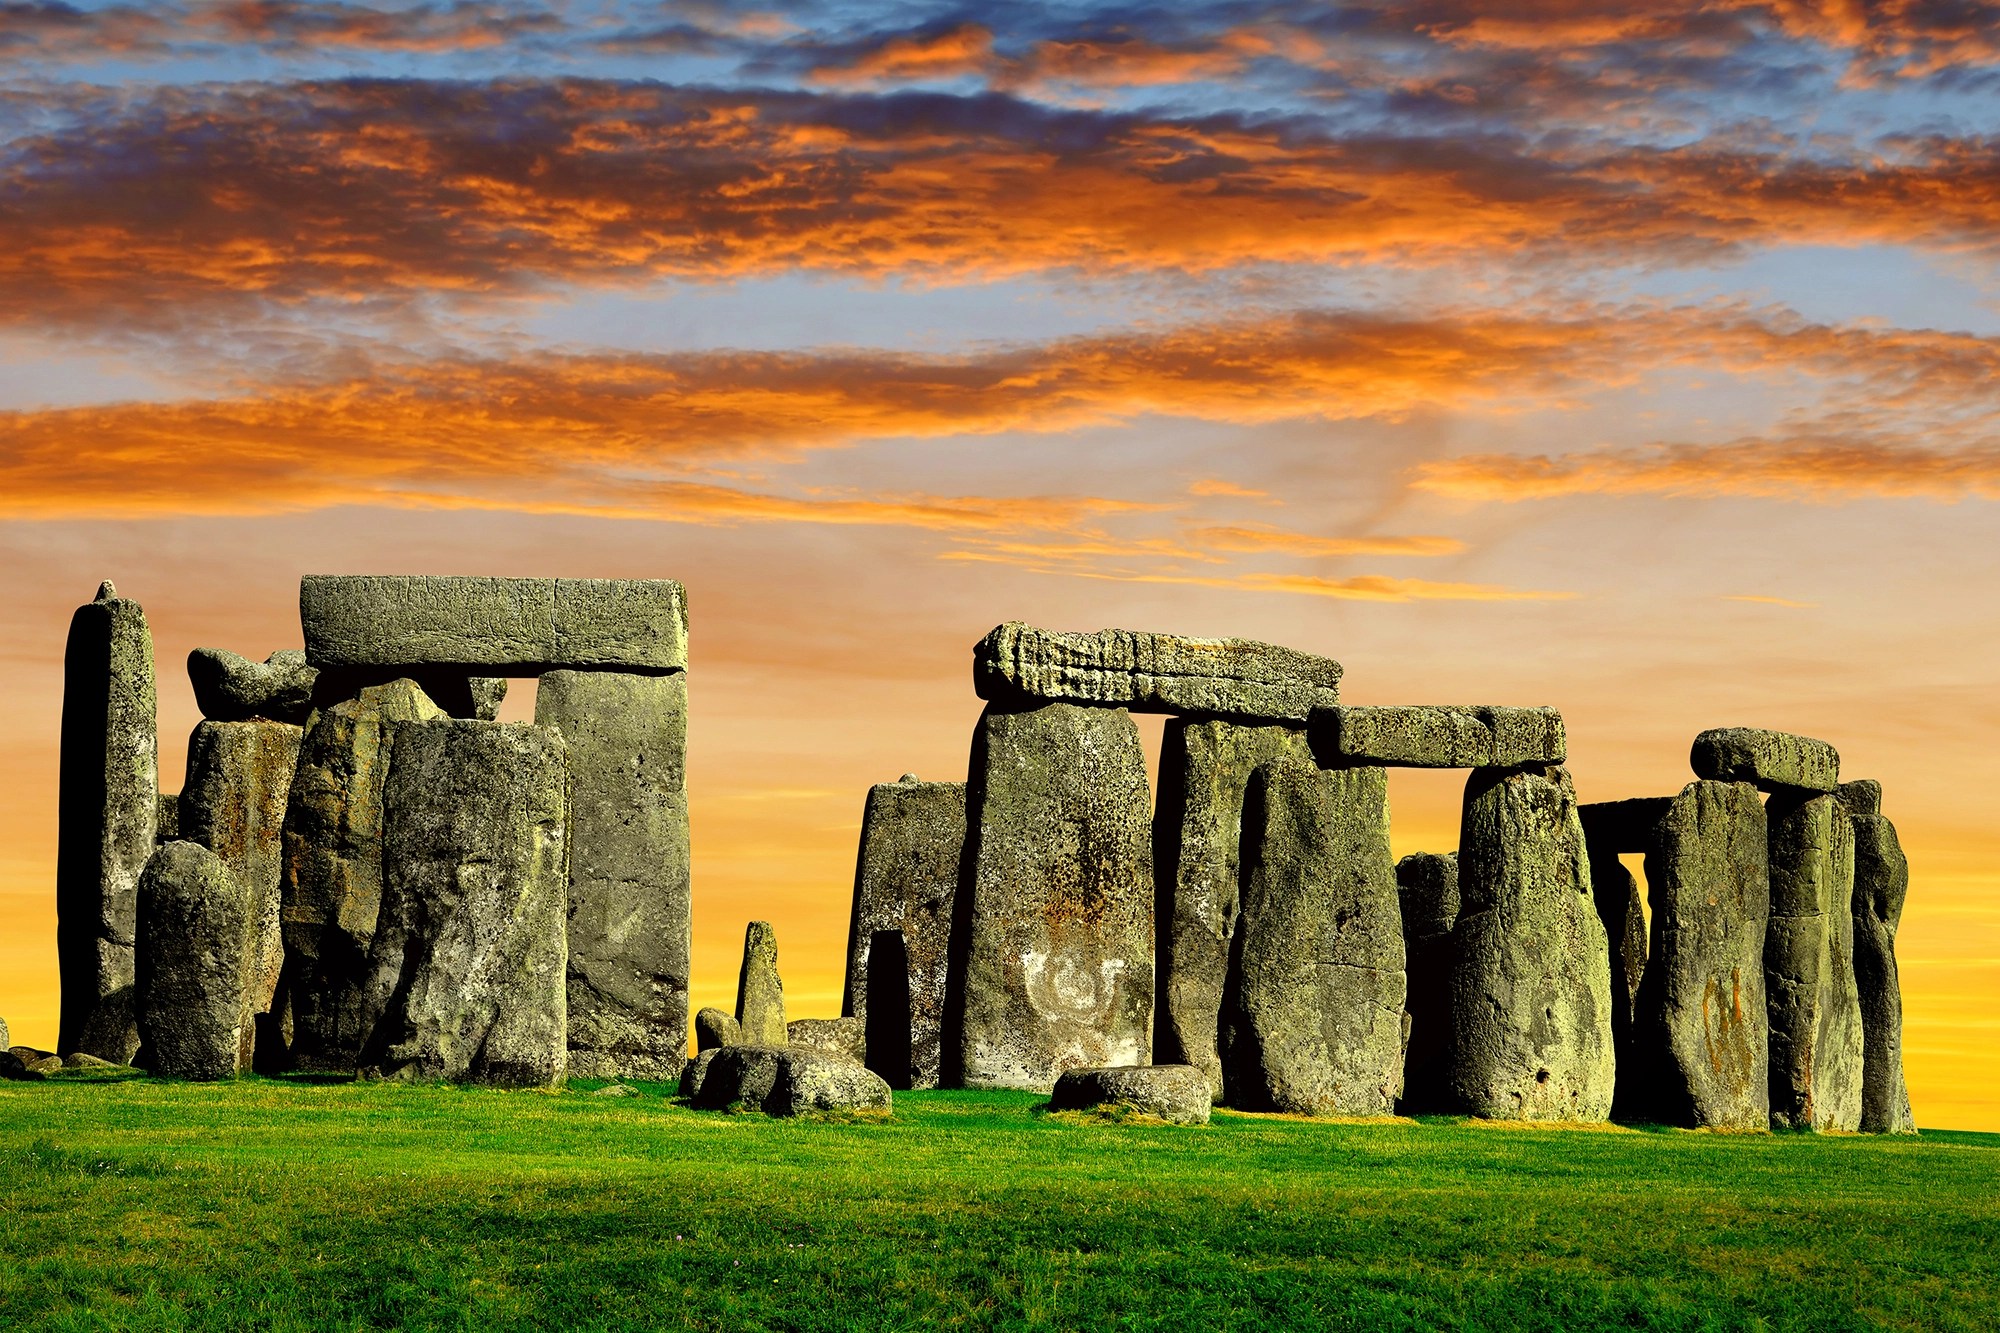 10 Archaeological Discoveries Which Rewrote History - Stonehenge